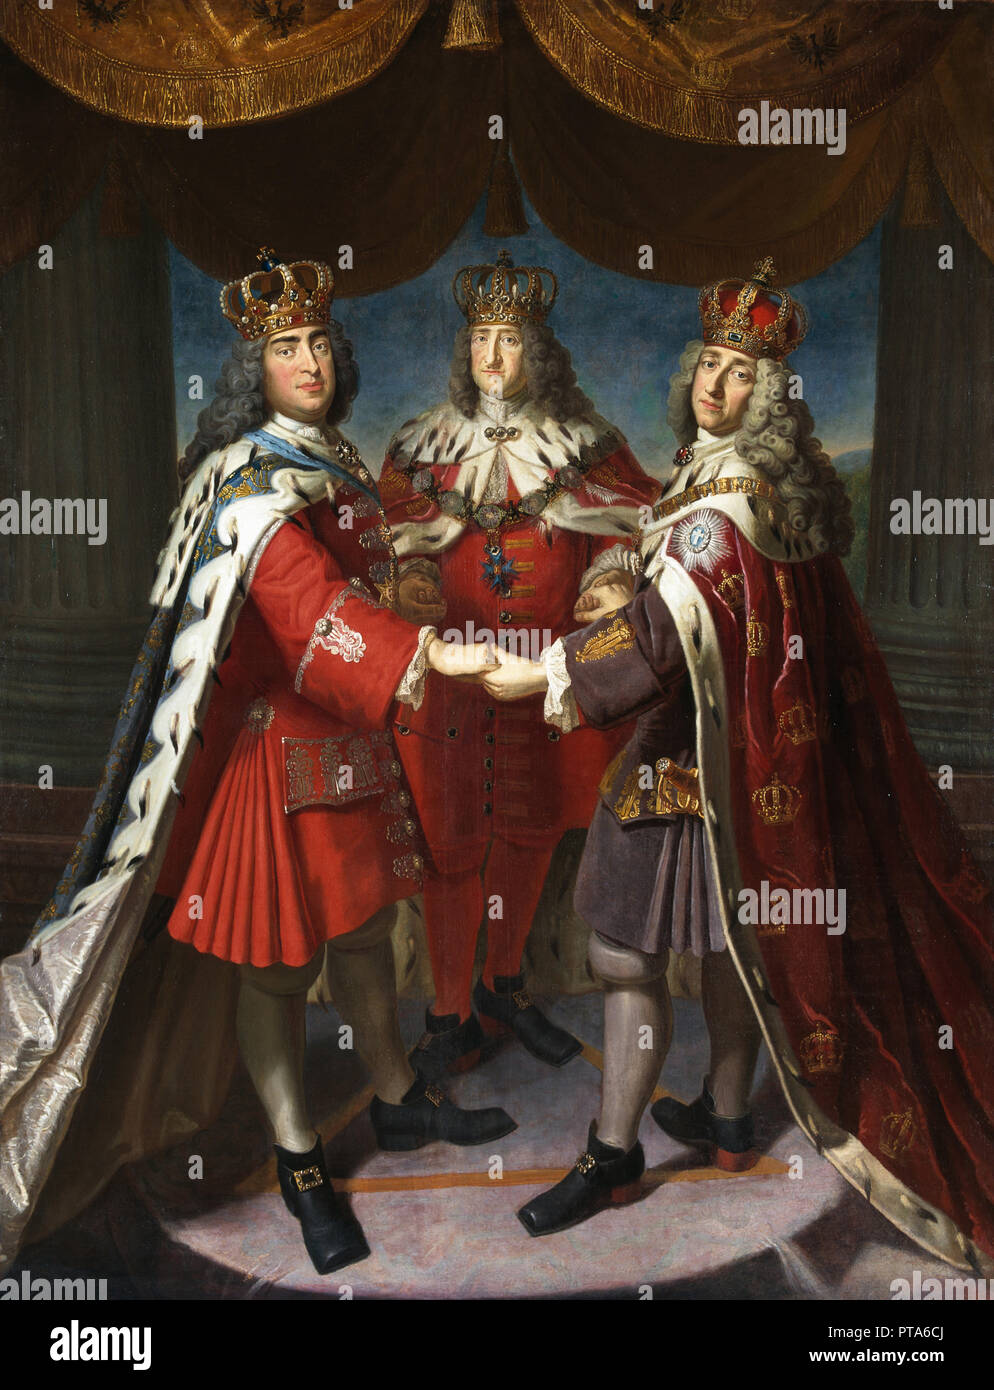 Alliance of Kings Frederick I. in Prussia,  August II the Strong and Frederick IV of Denmark, 1709. Creator: Gericke, Samuel Theodor (1665-1729). Stock Photo